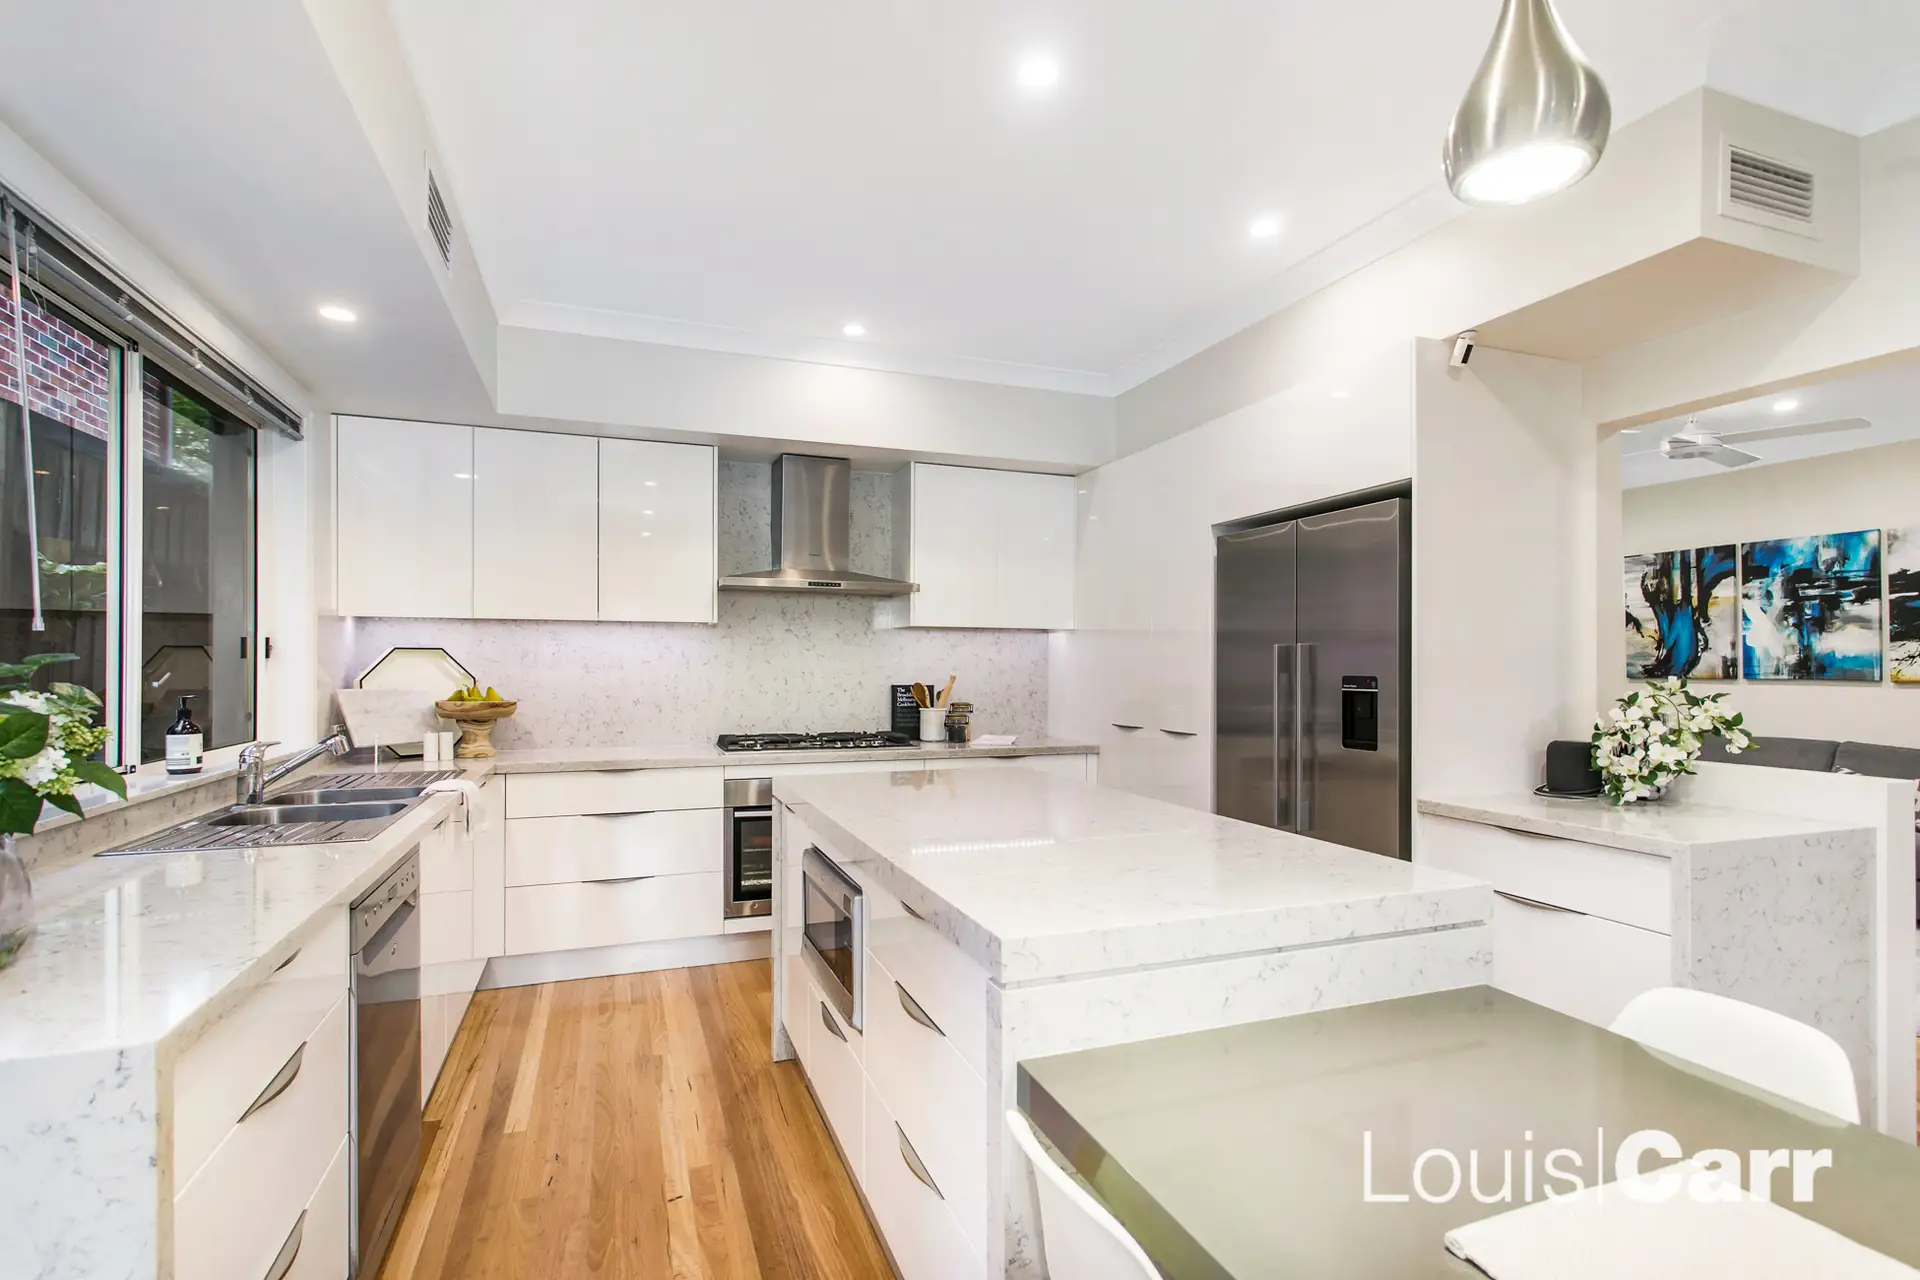 Photo #7: 12 Forestwood Crescent, West Pennant Hills - Sold by Louis Carr Real Estate